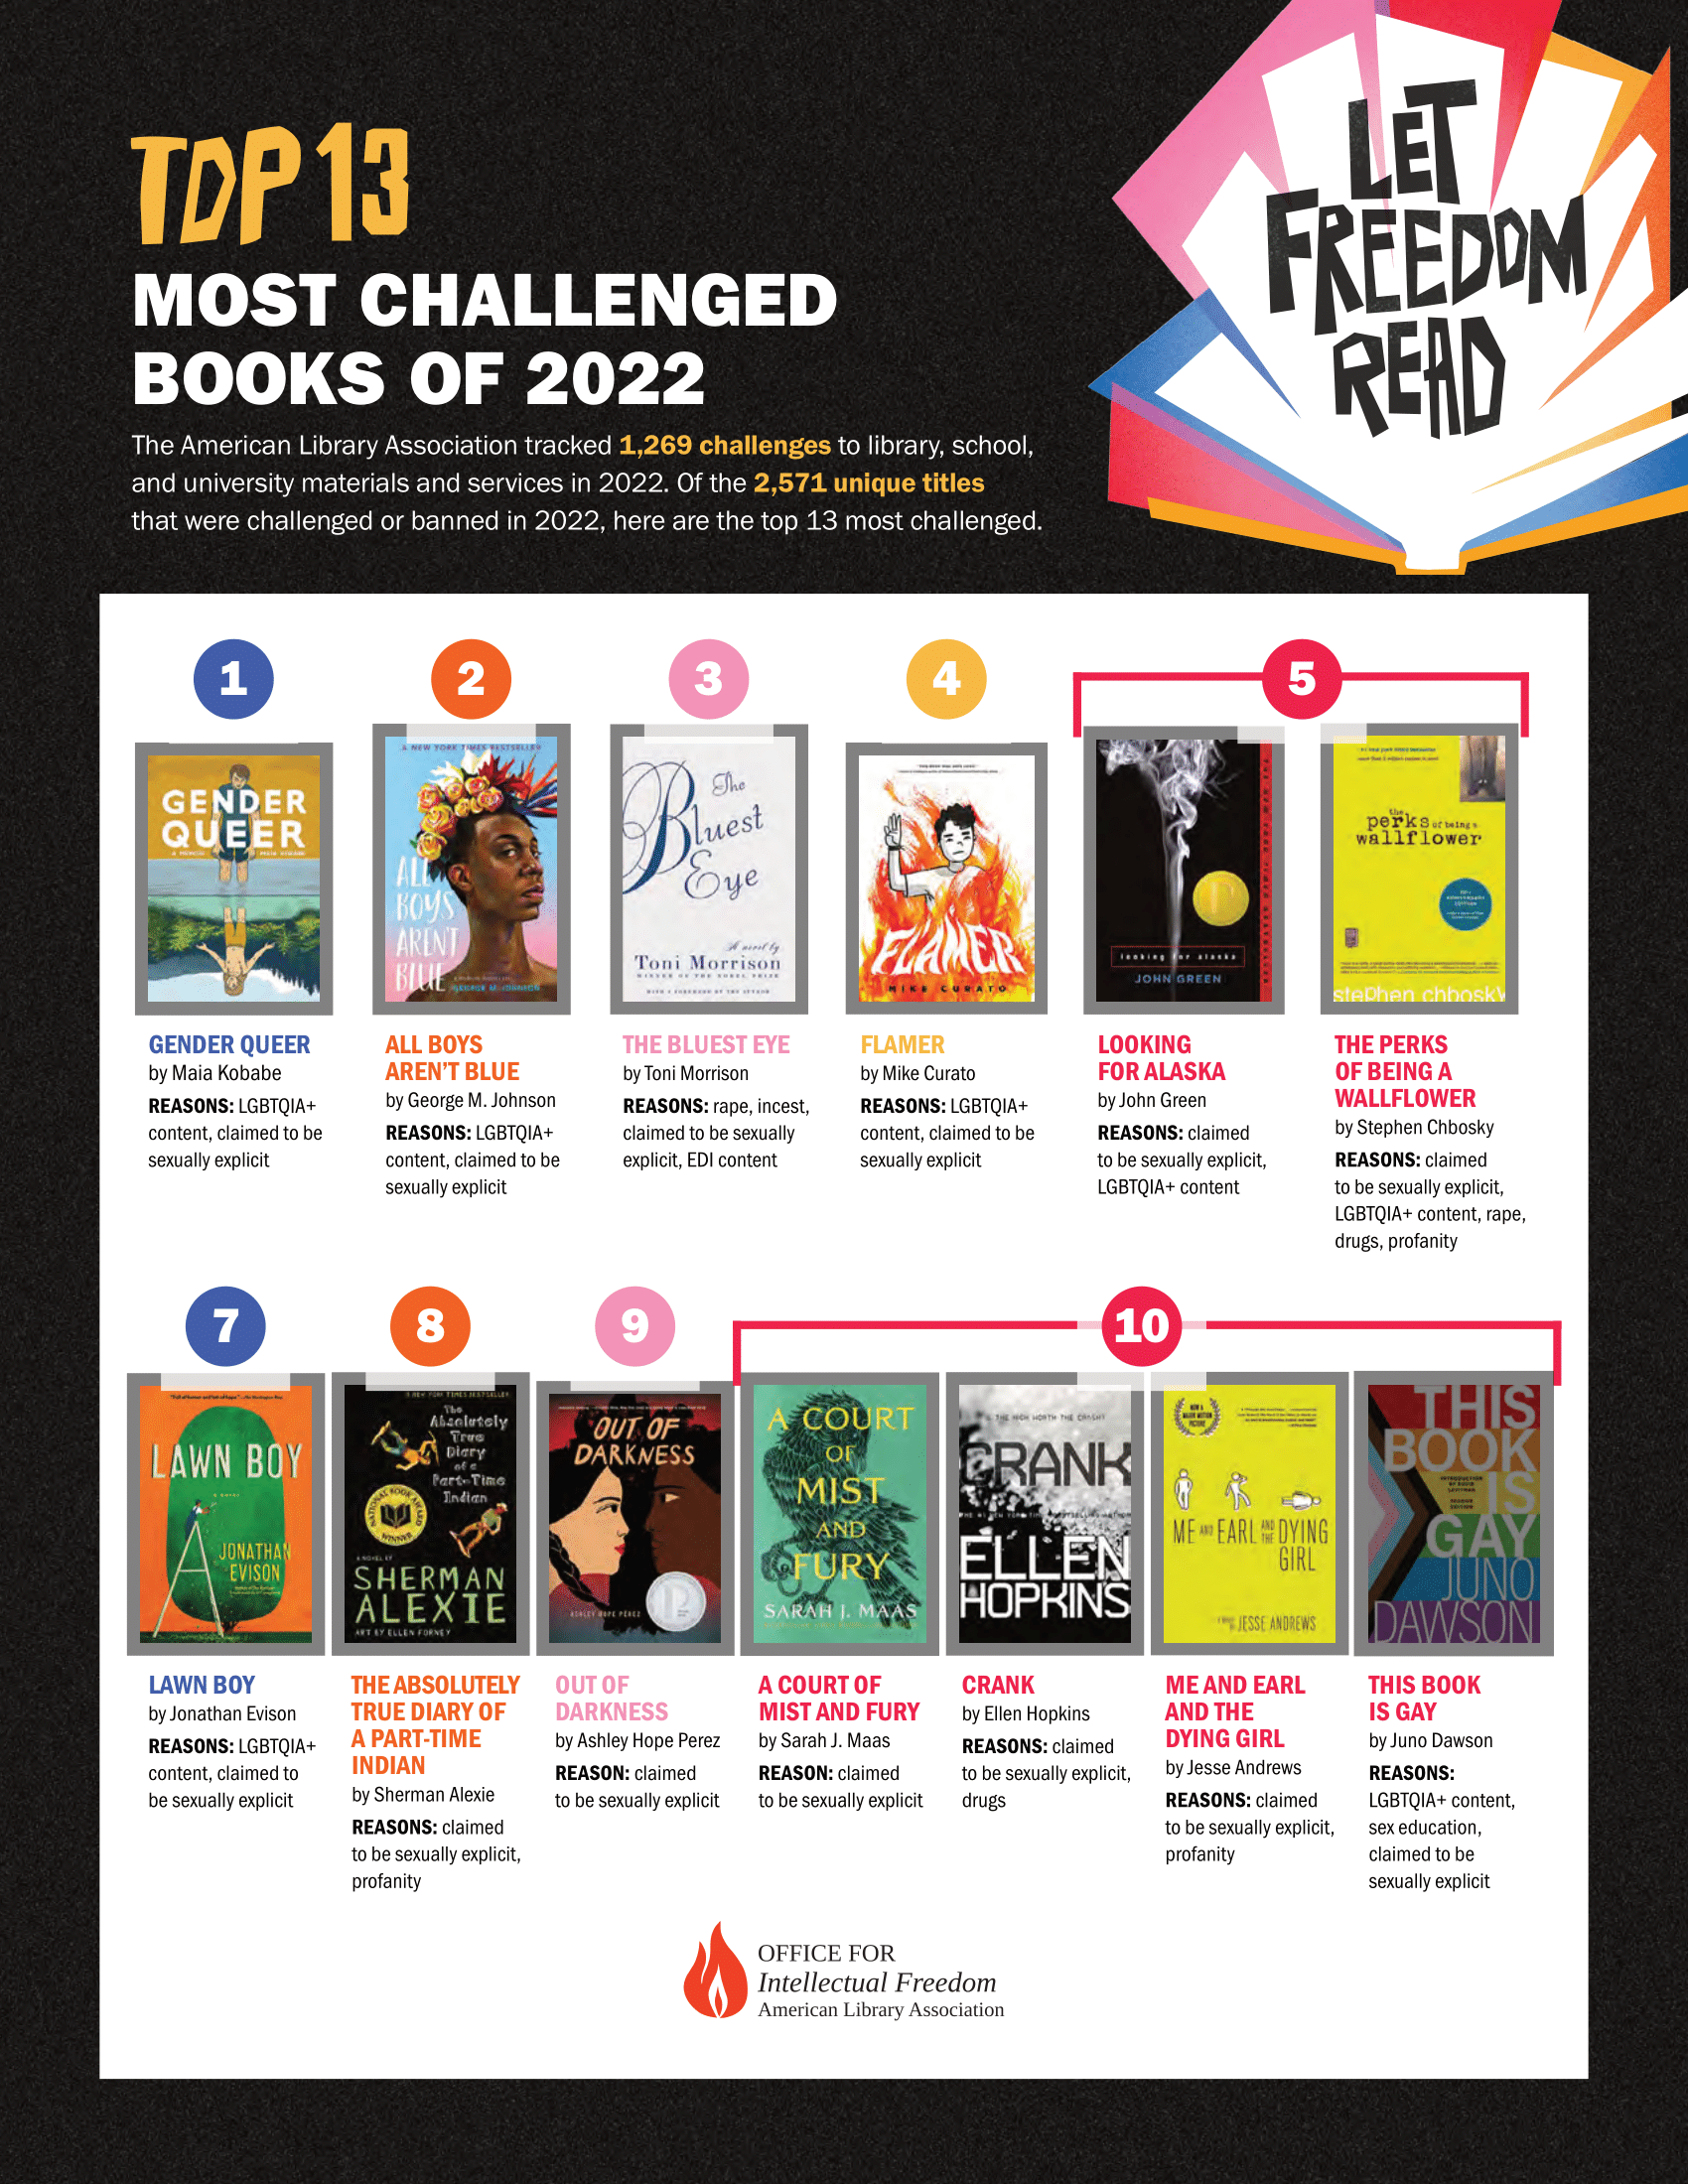 a graphic of the books listed with the reasons they were challenged (available at the link)